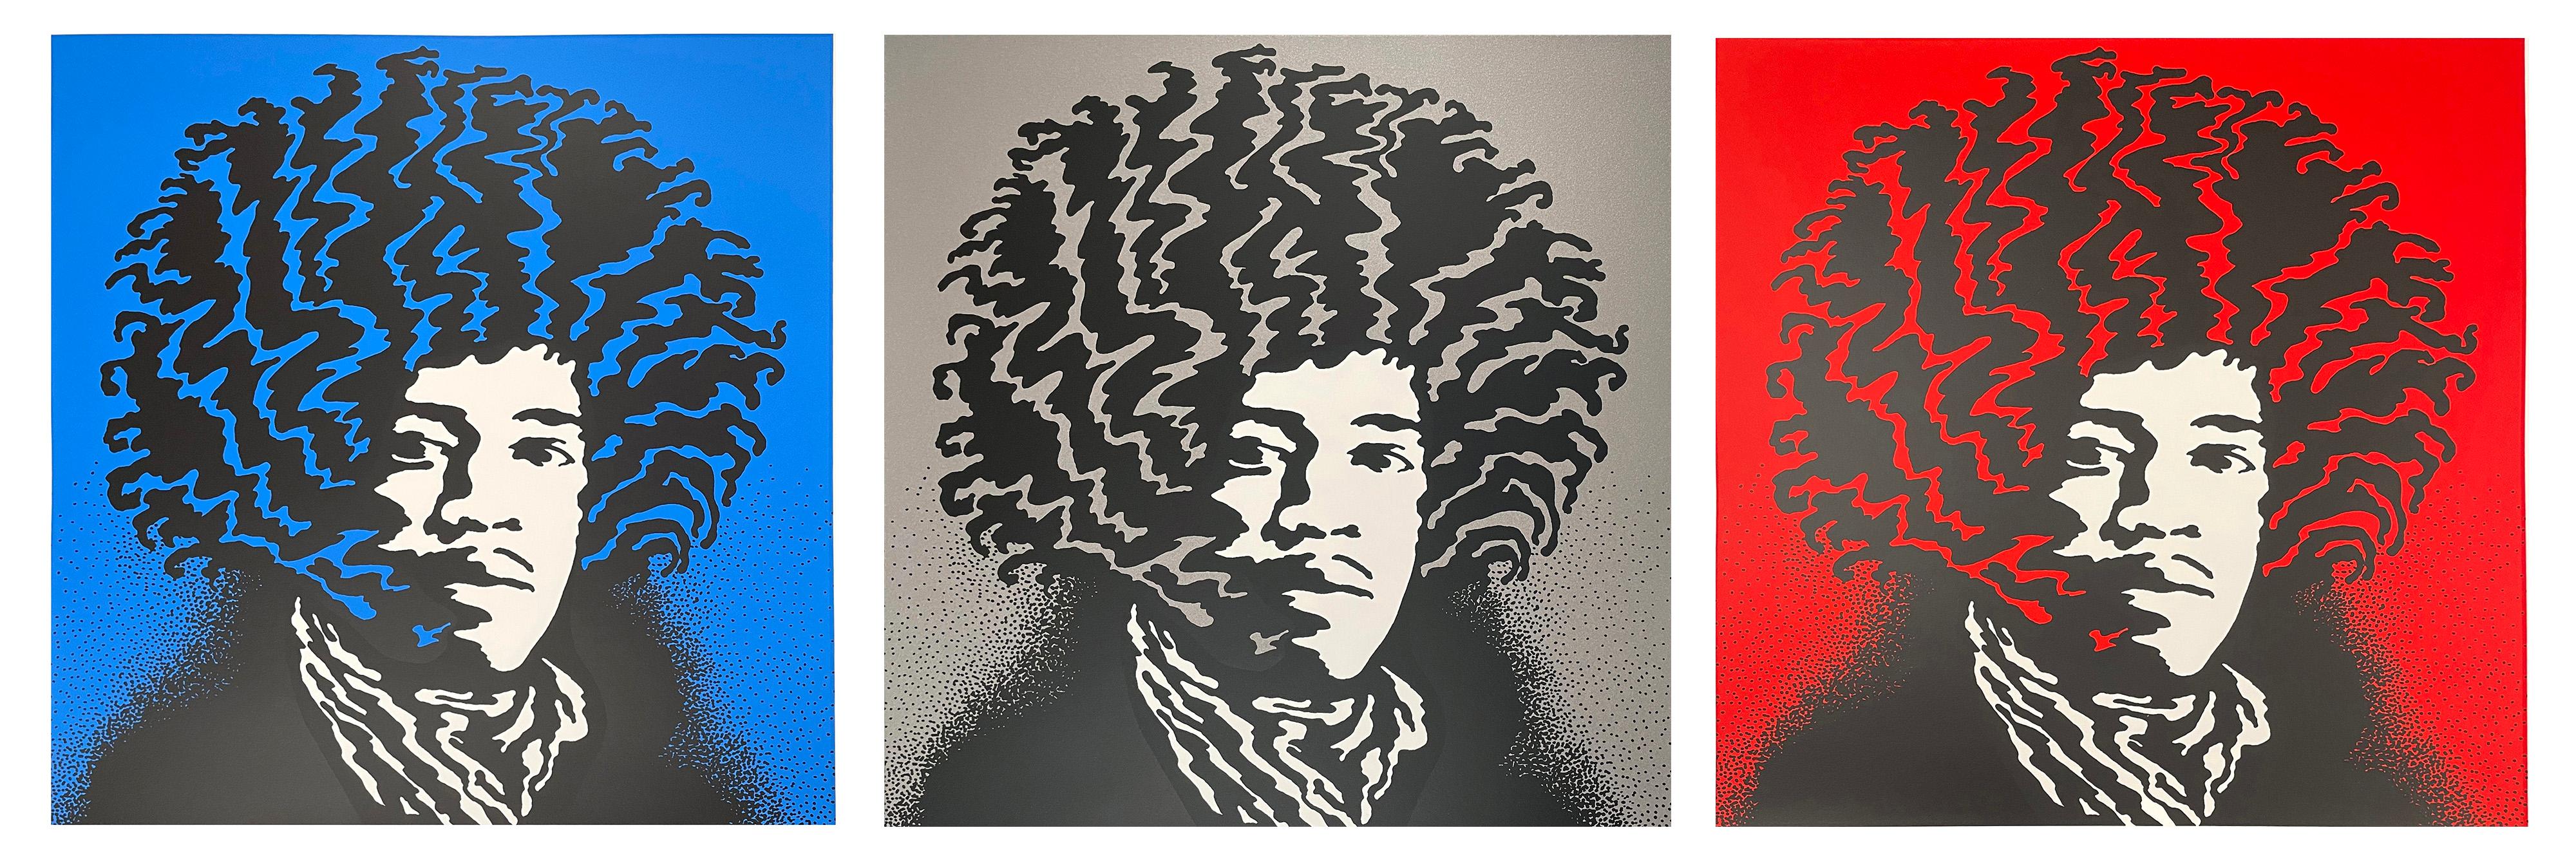 The New Jimi Hendrix Silkscreens
A suite of 3 silkscreens, blue, red + silver - hand pulled by the artist
Paper size: 28 x 28